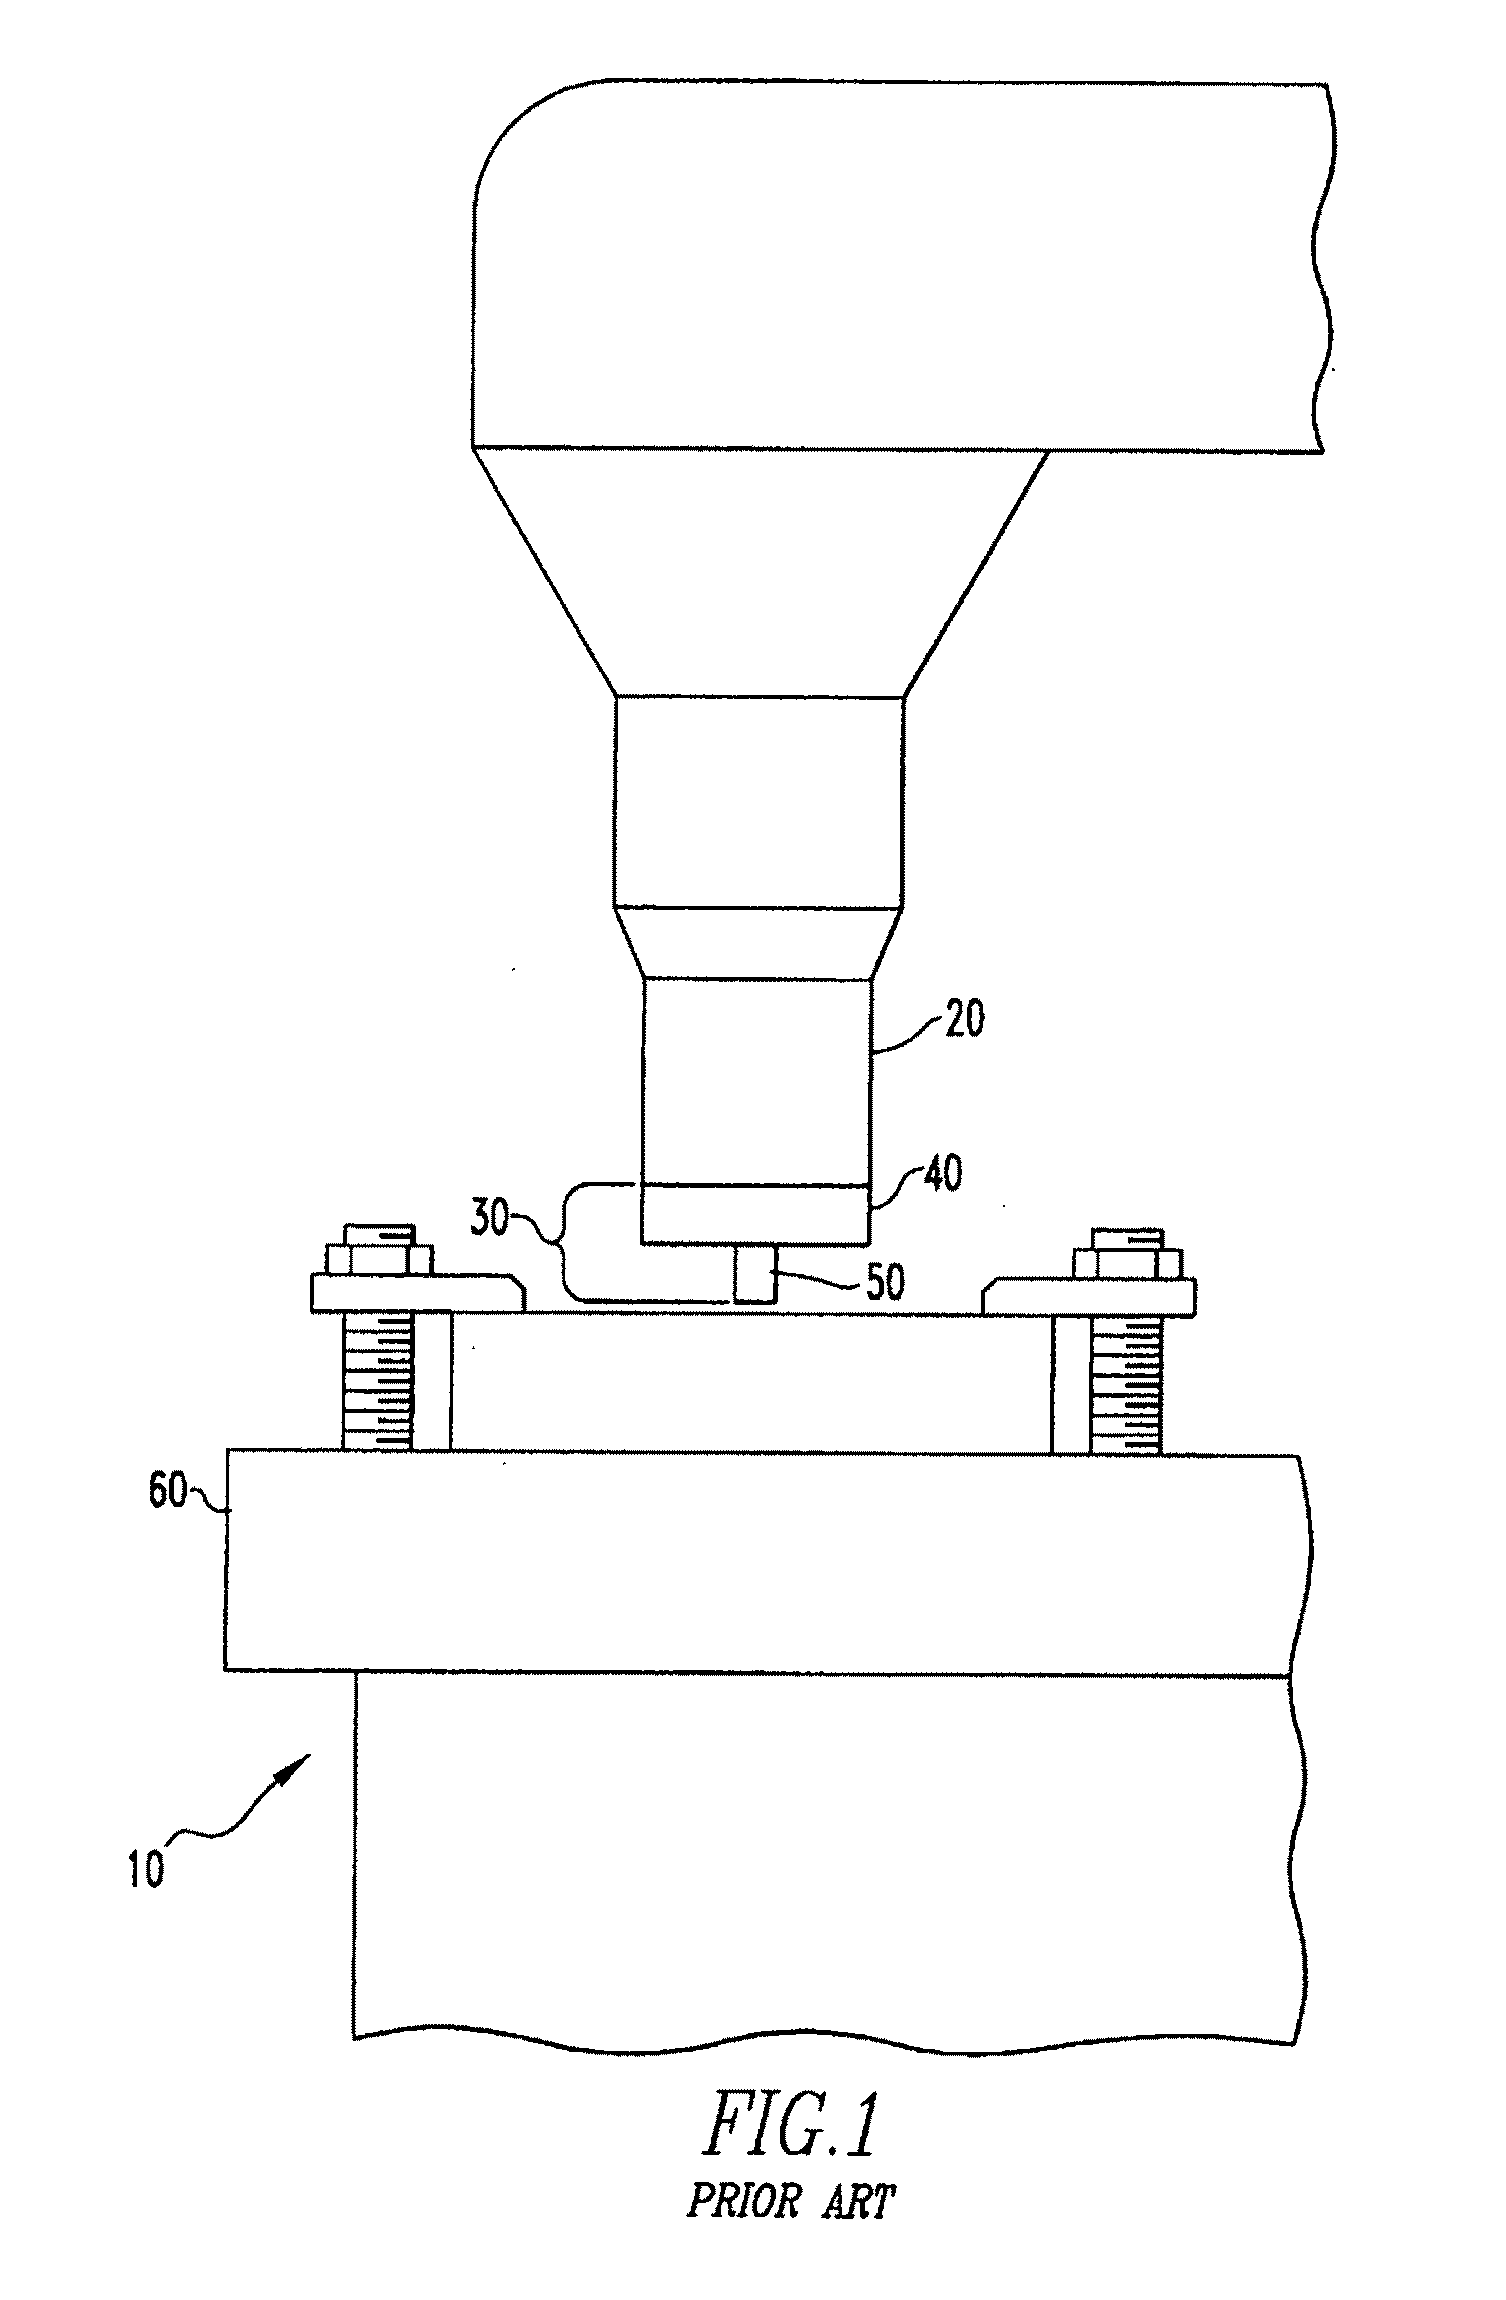 Refractory metal tool for friction stir welding comprising a shoulder made of tungsten, molybdenum, tantalum, niobium or hafnium alloy and a coated or treated surface